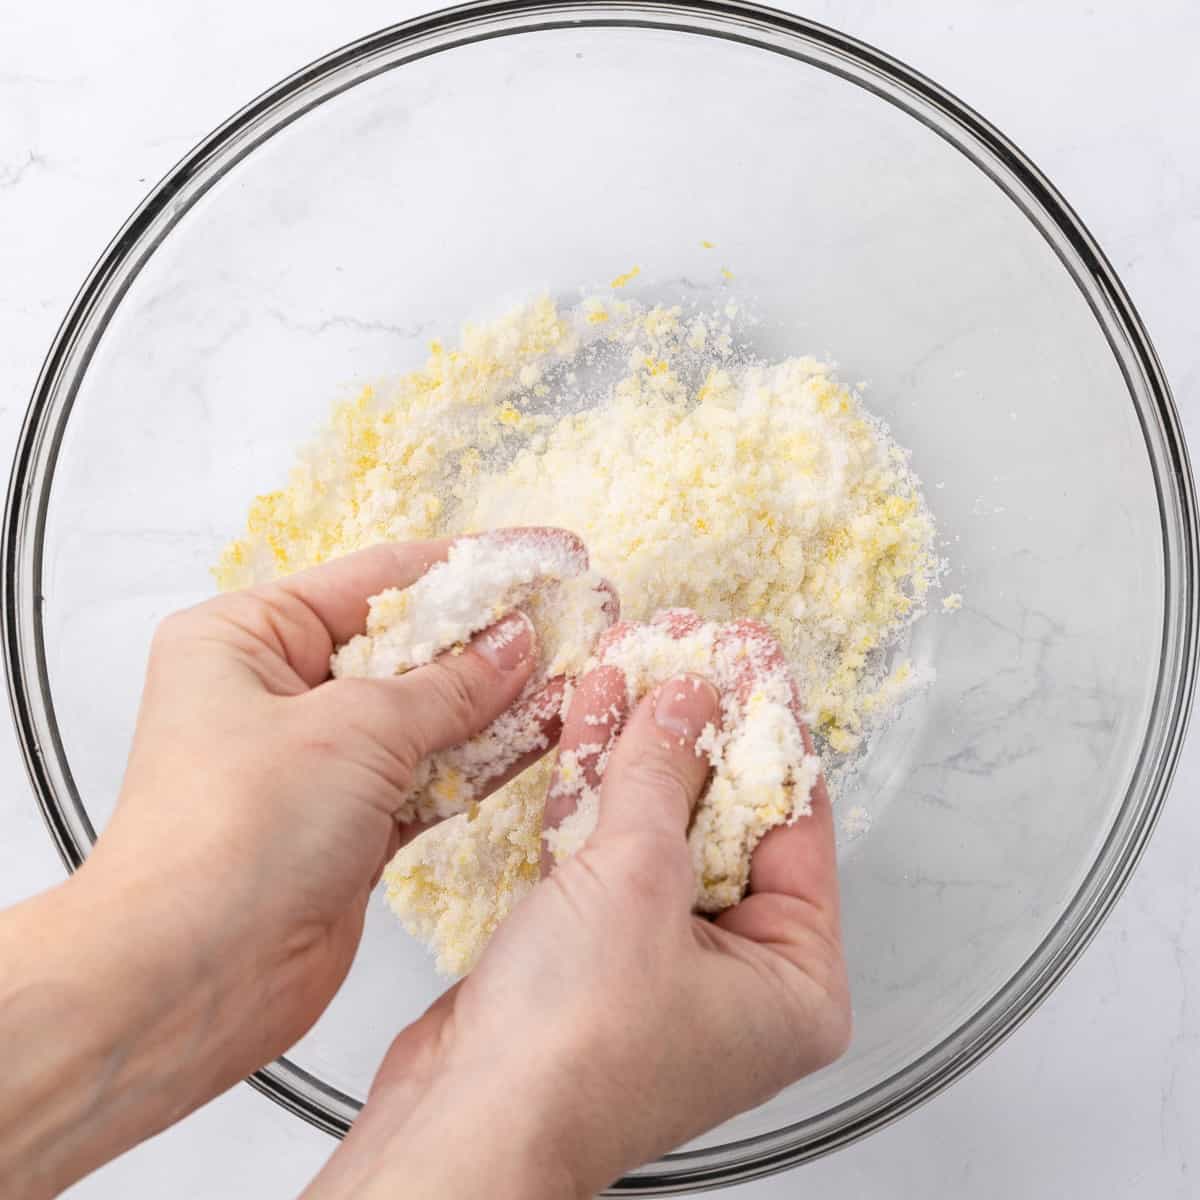 A person using their hands to rub granulated sugar and lemon zest together in a large glass mixing bowl.